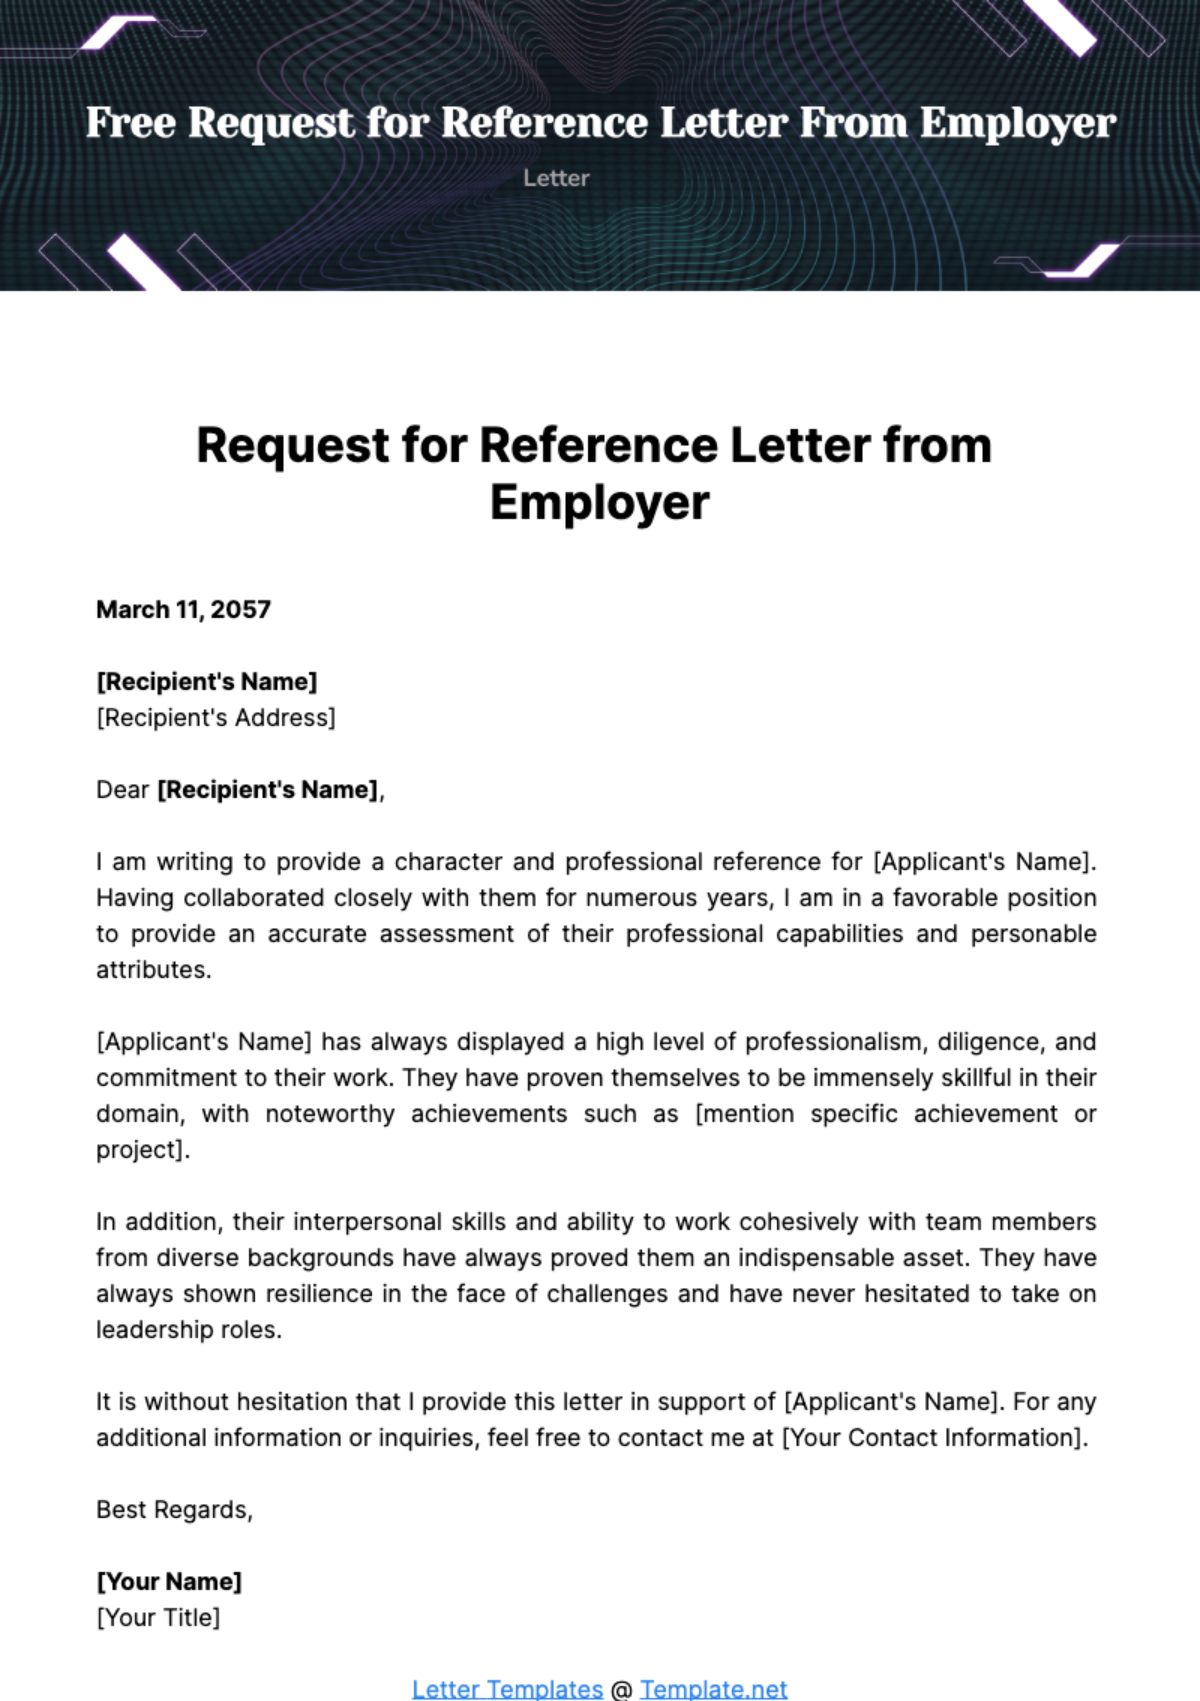 Free Request for Reference Letter from Employer Template